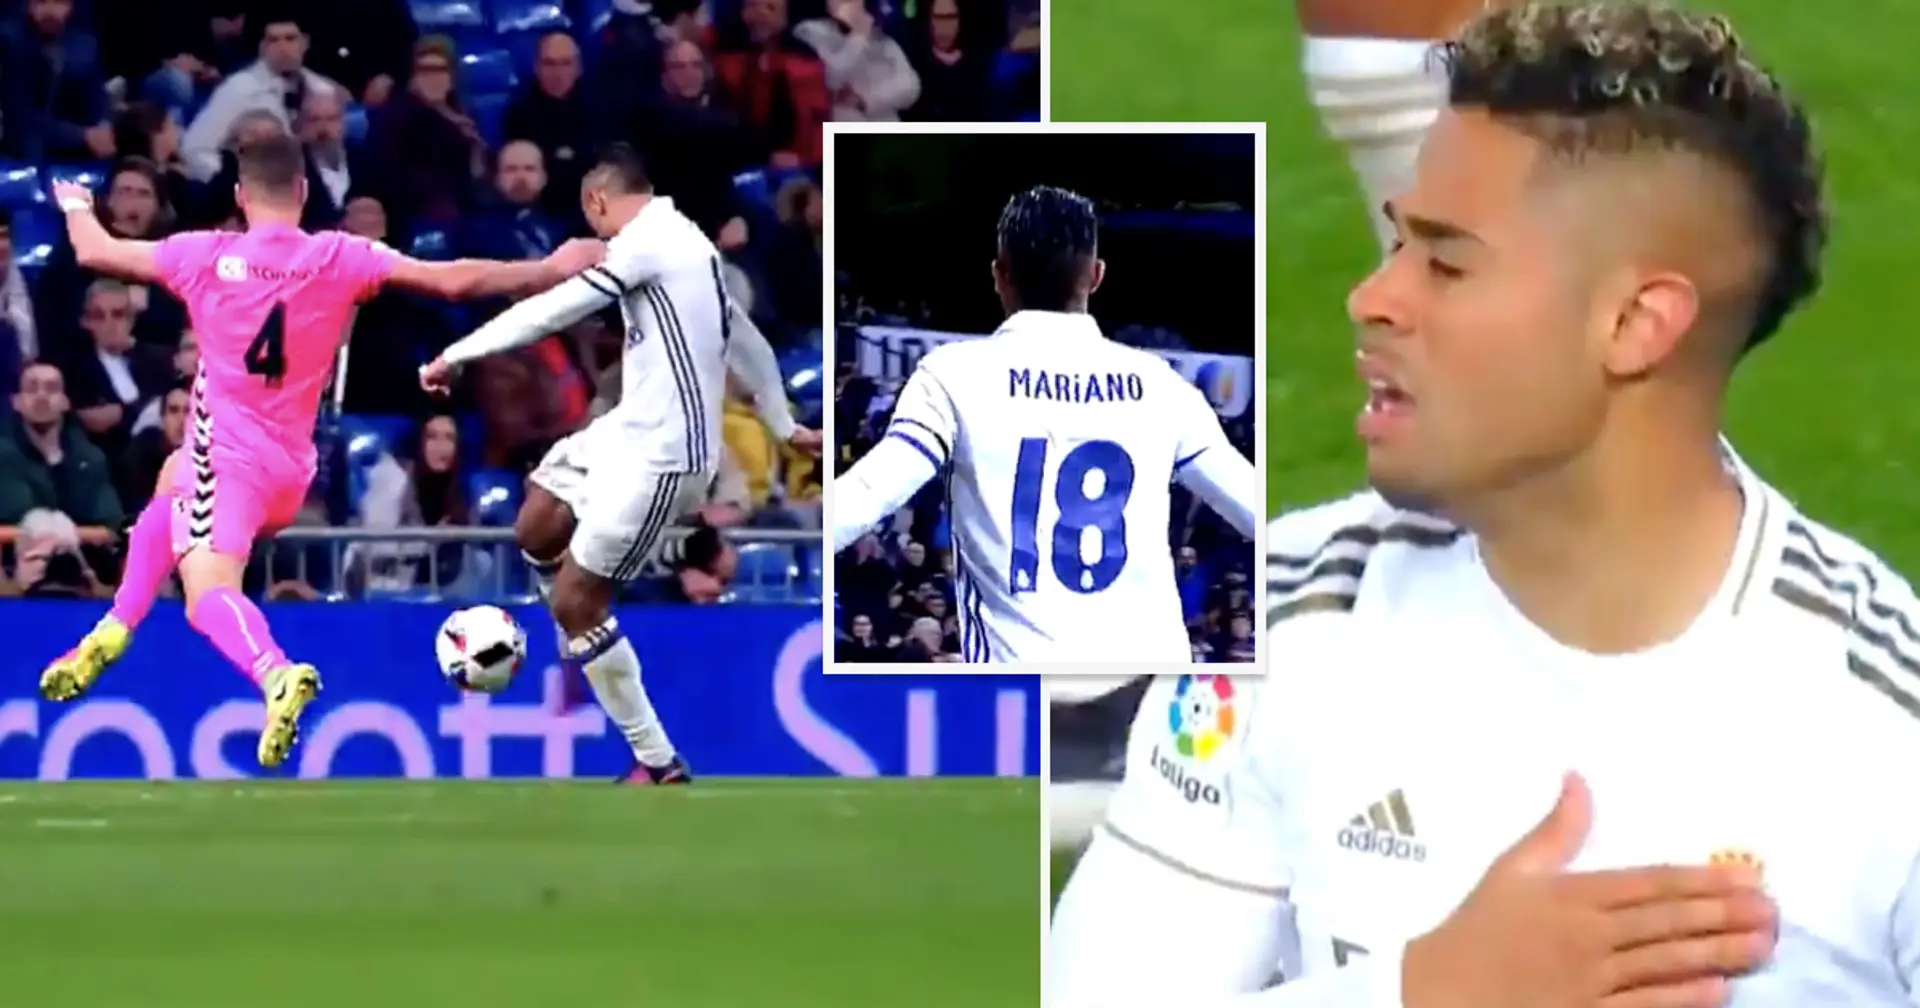 When was the last time Mariano started for Real Madrid? Answered